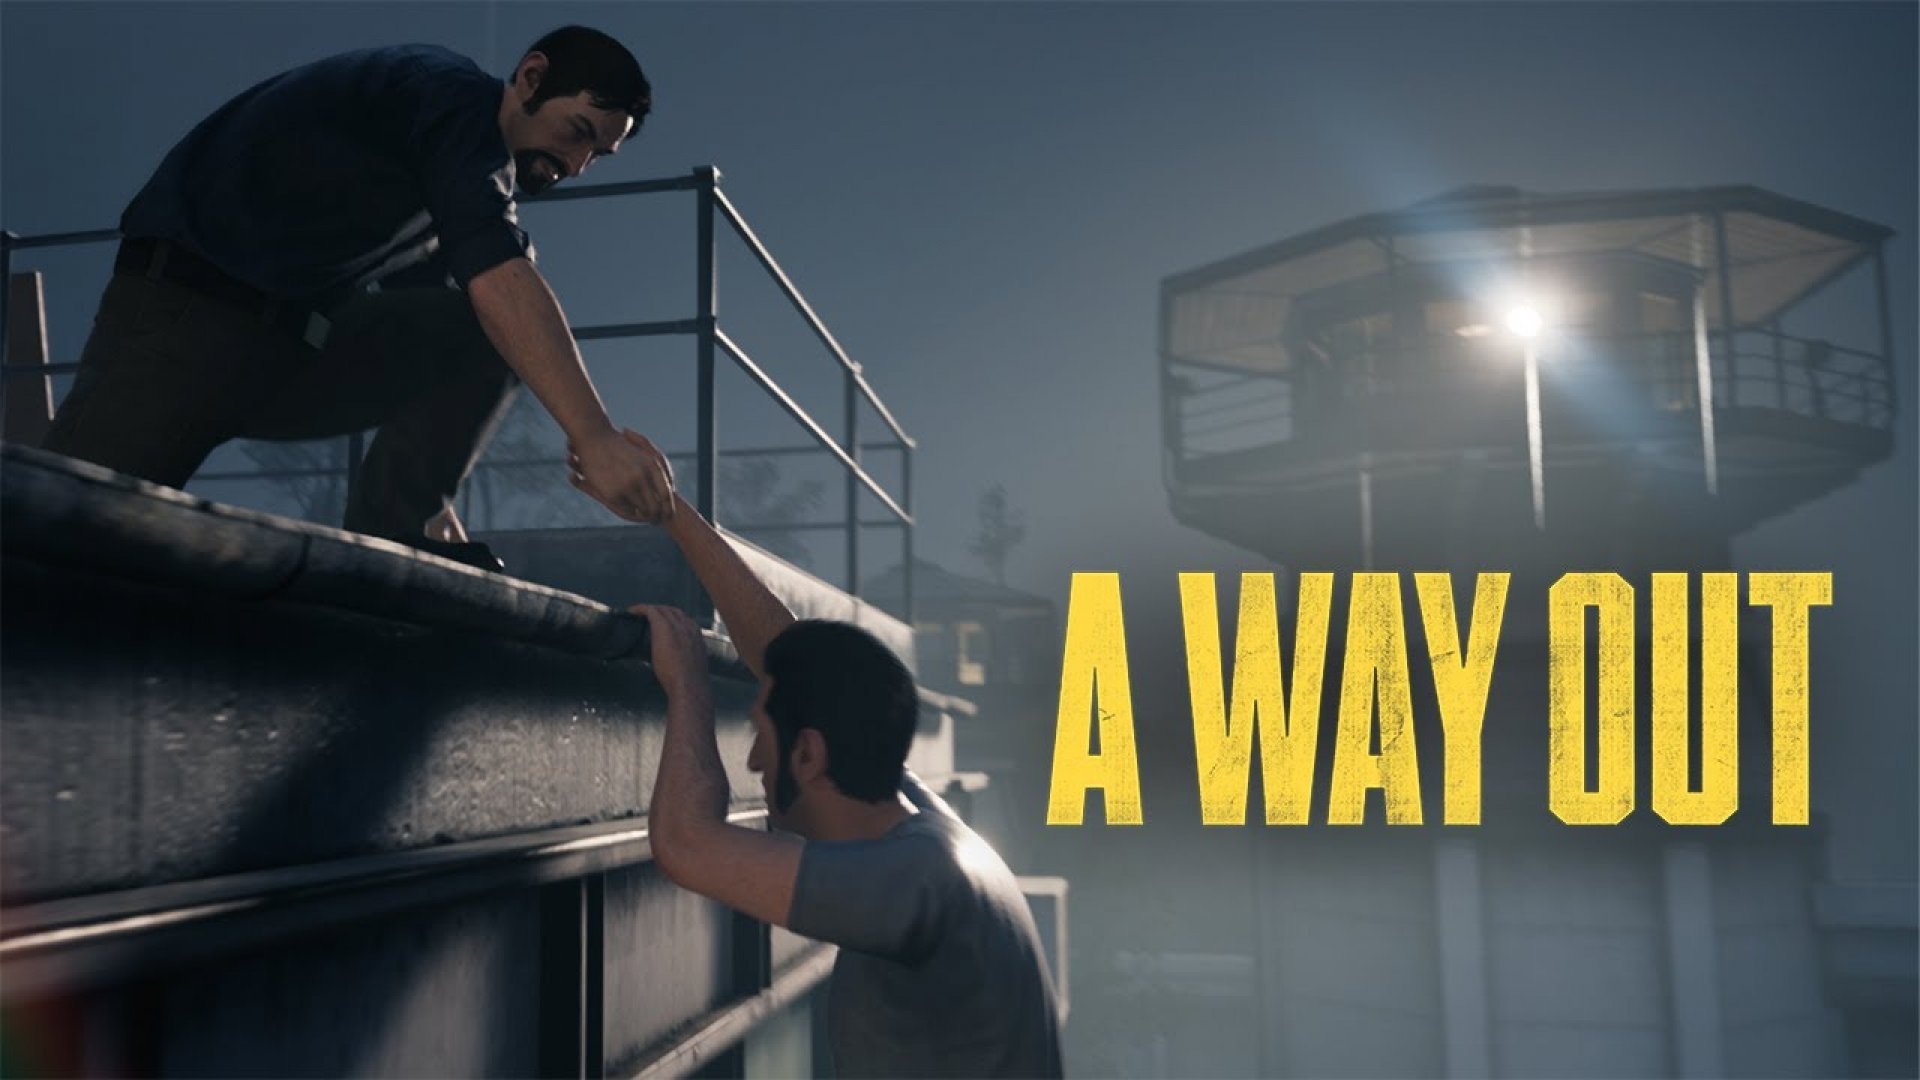 A way out game. Way out игра. Побег из тюрьмы a way out. А Wаy оut игра. A way AOT.